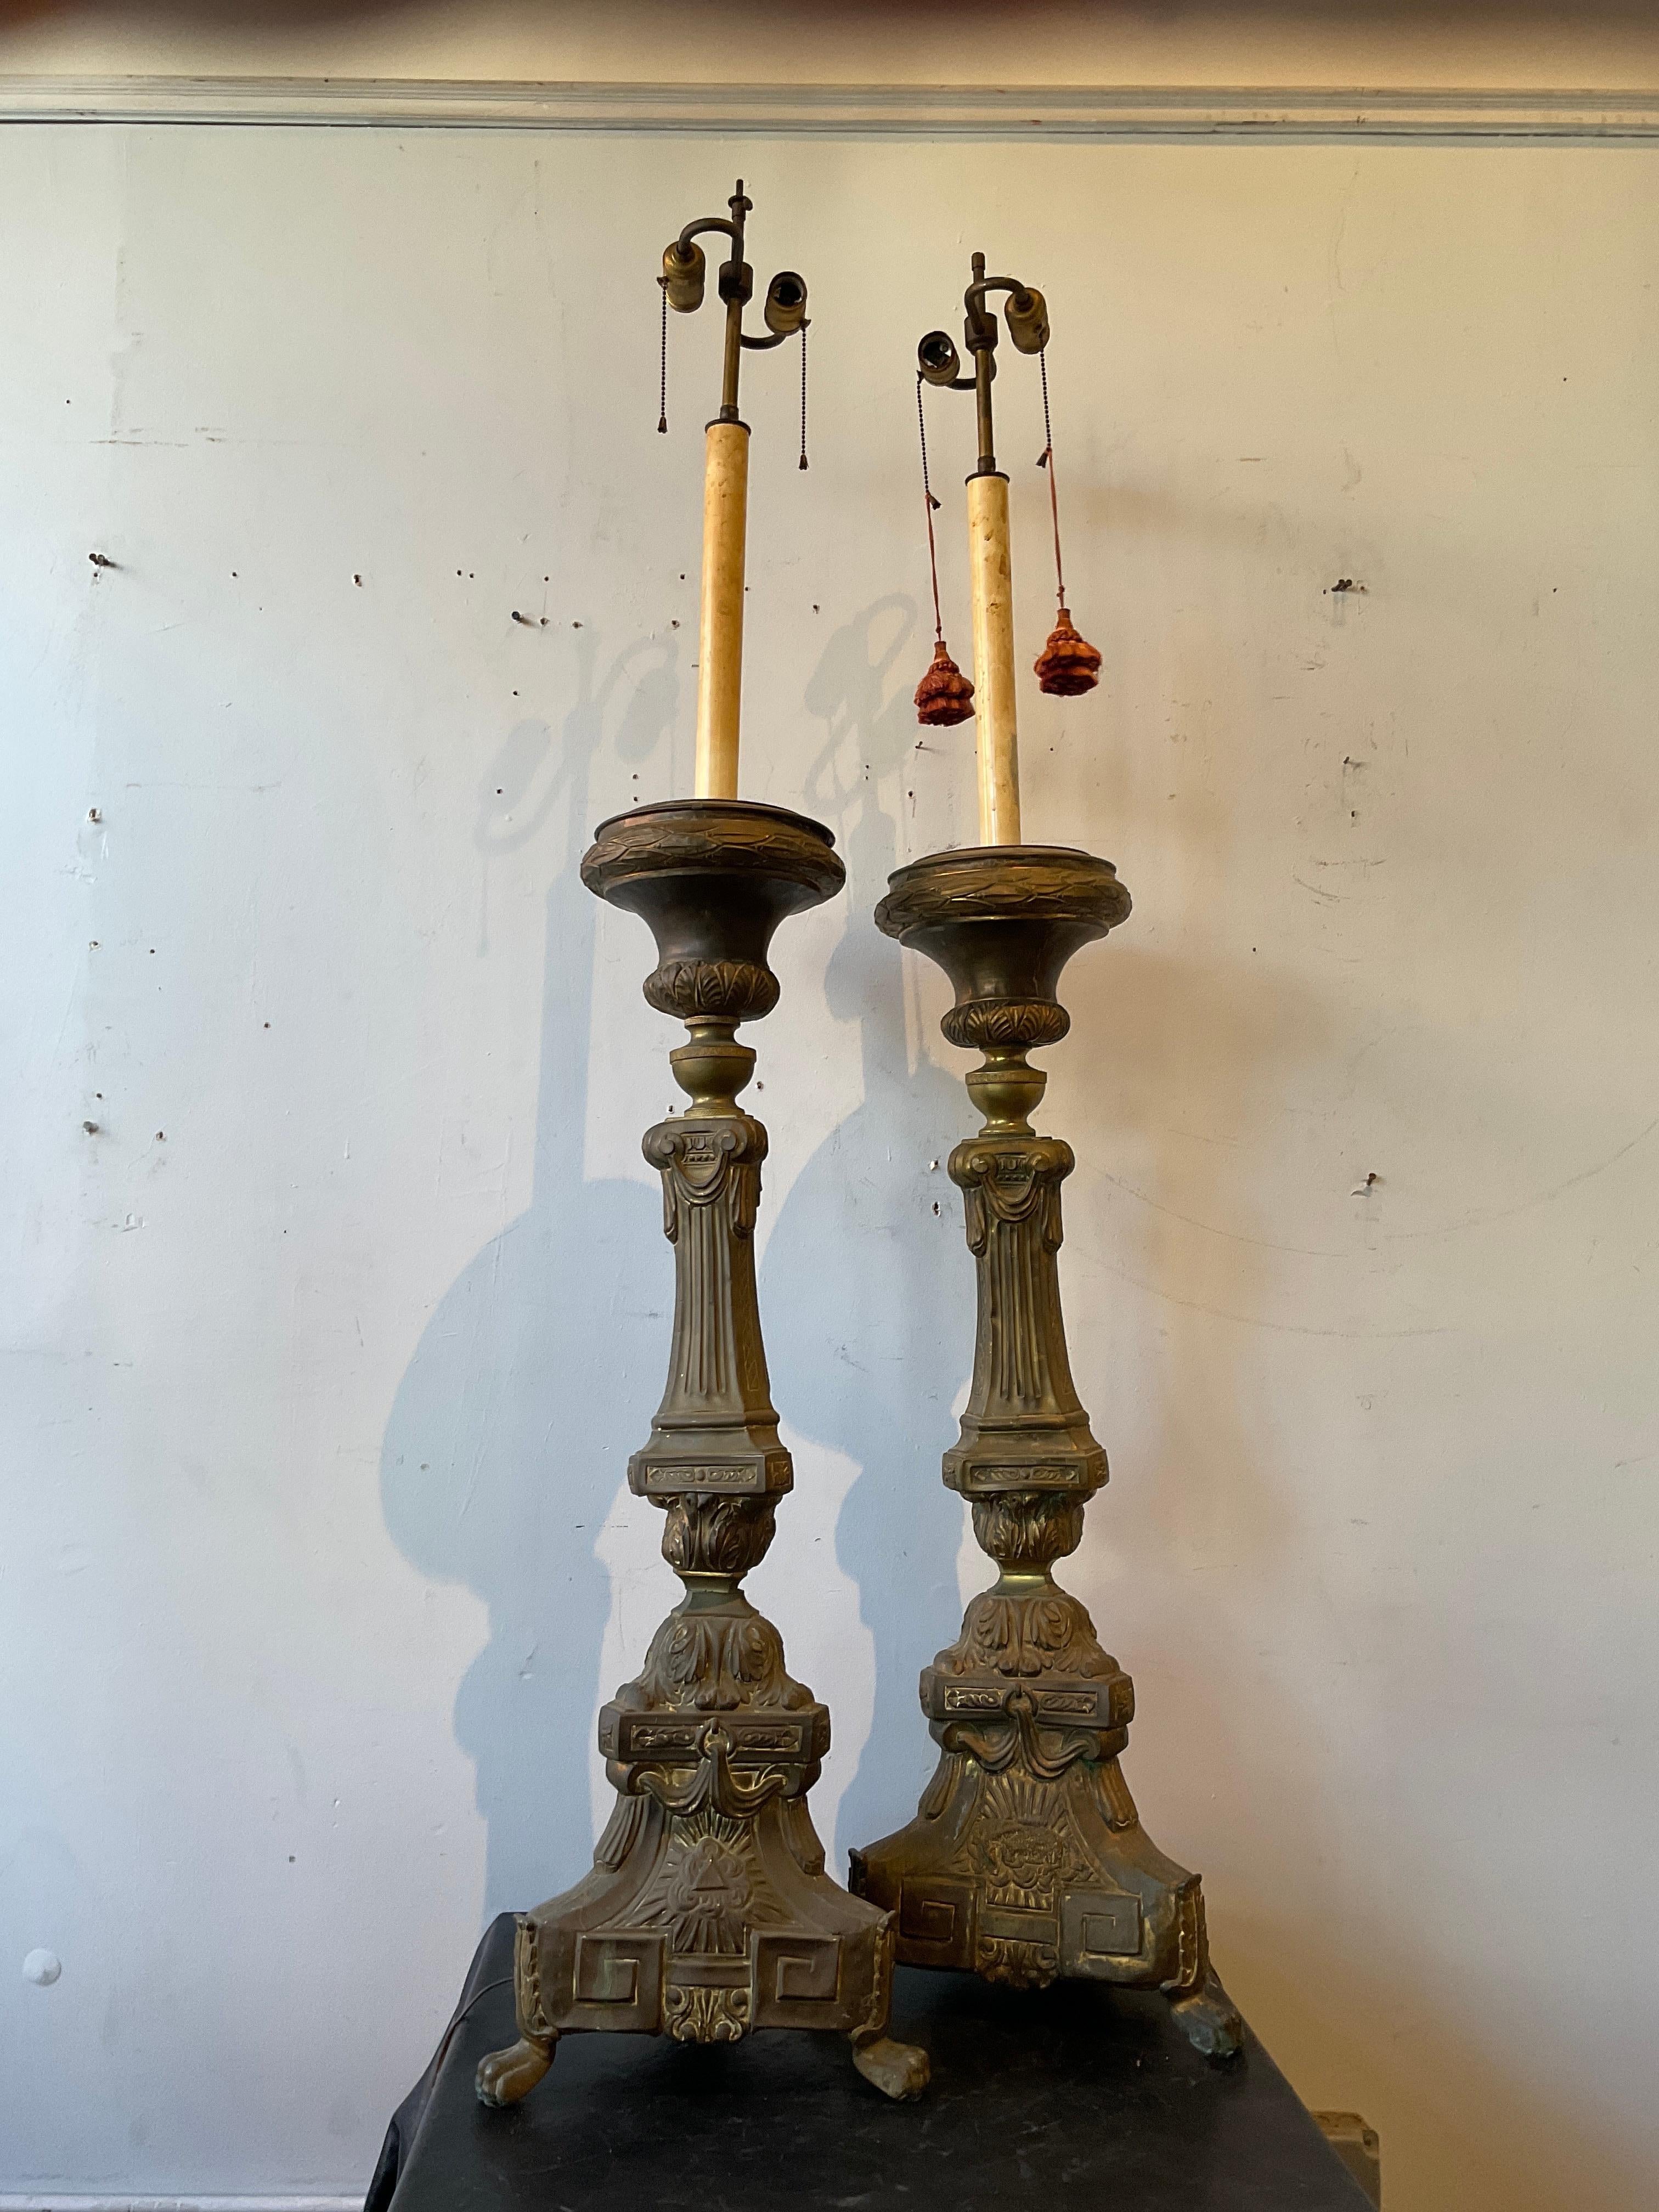 Pair of 1870s tall brass church candlestick lamps.